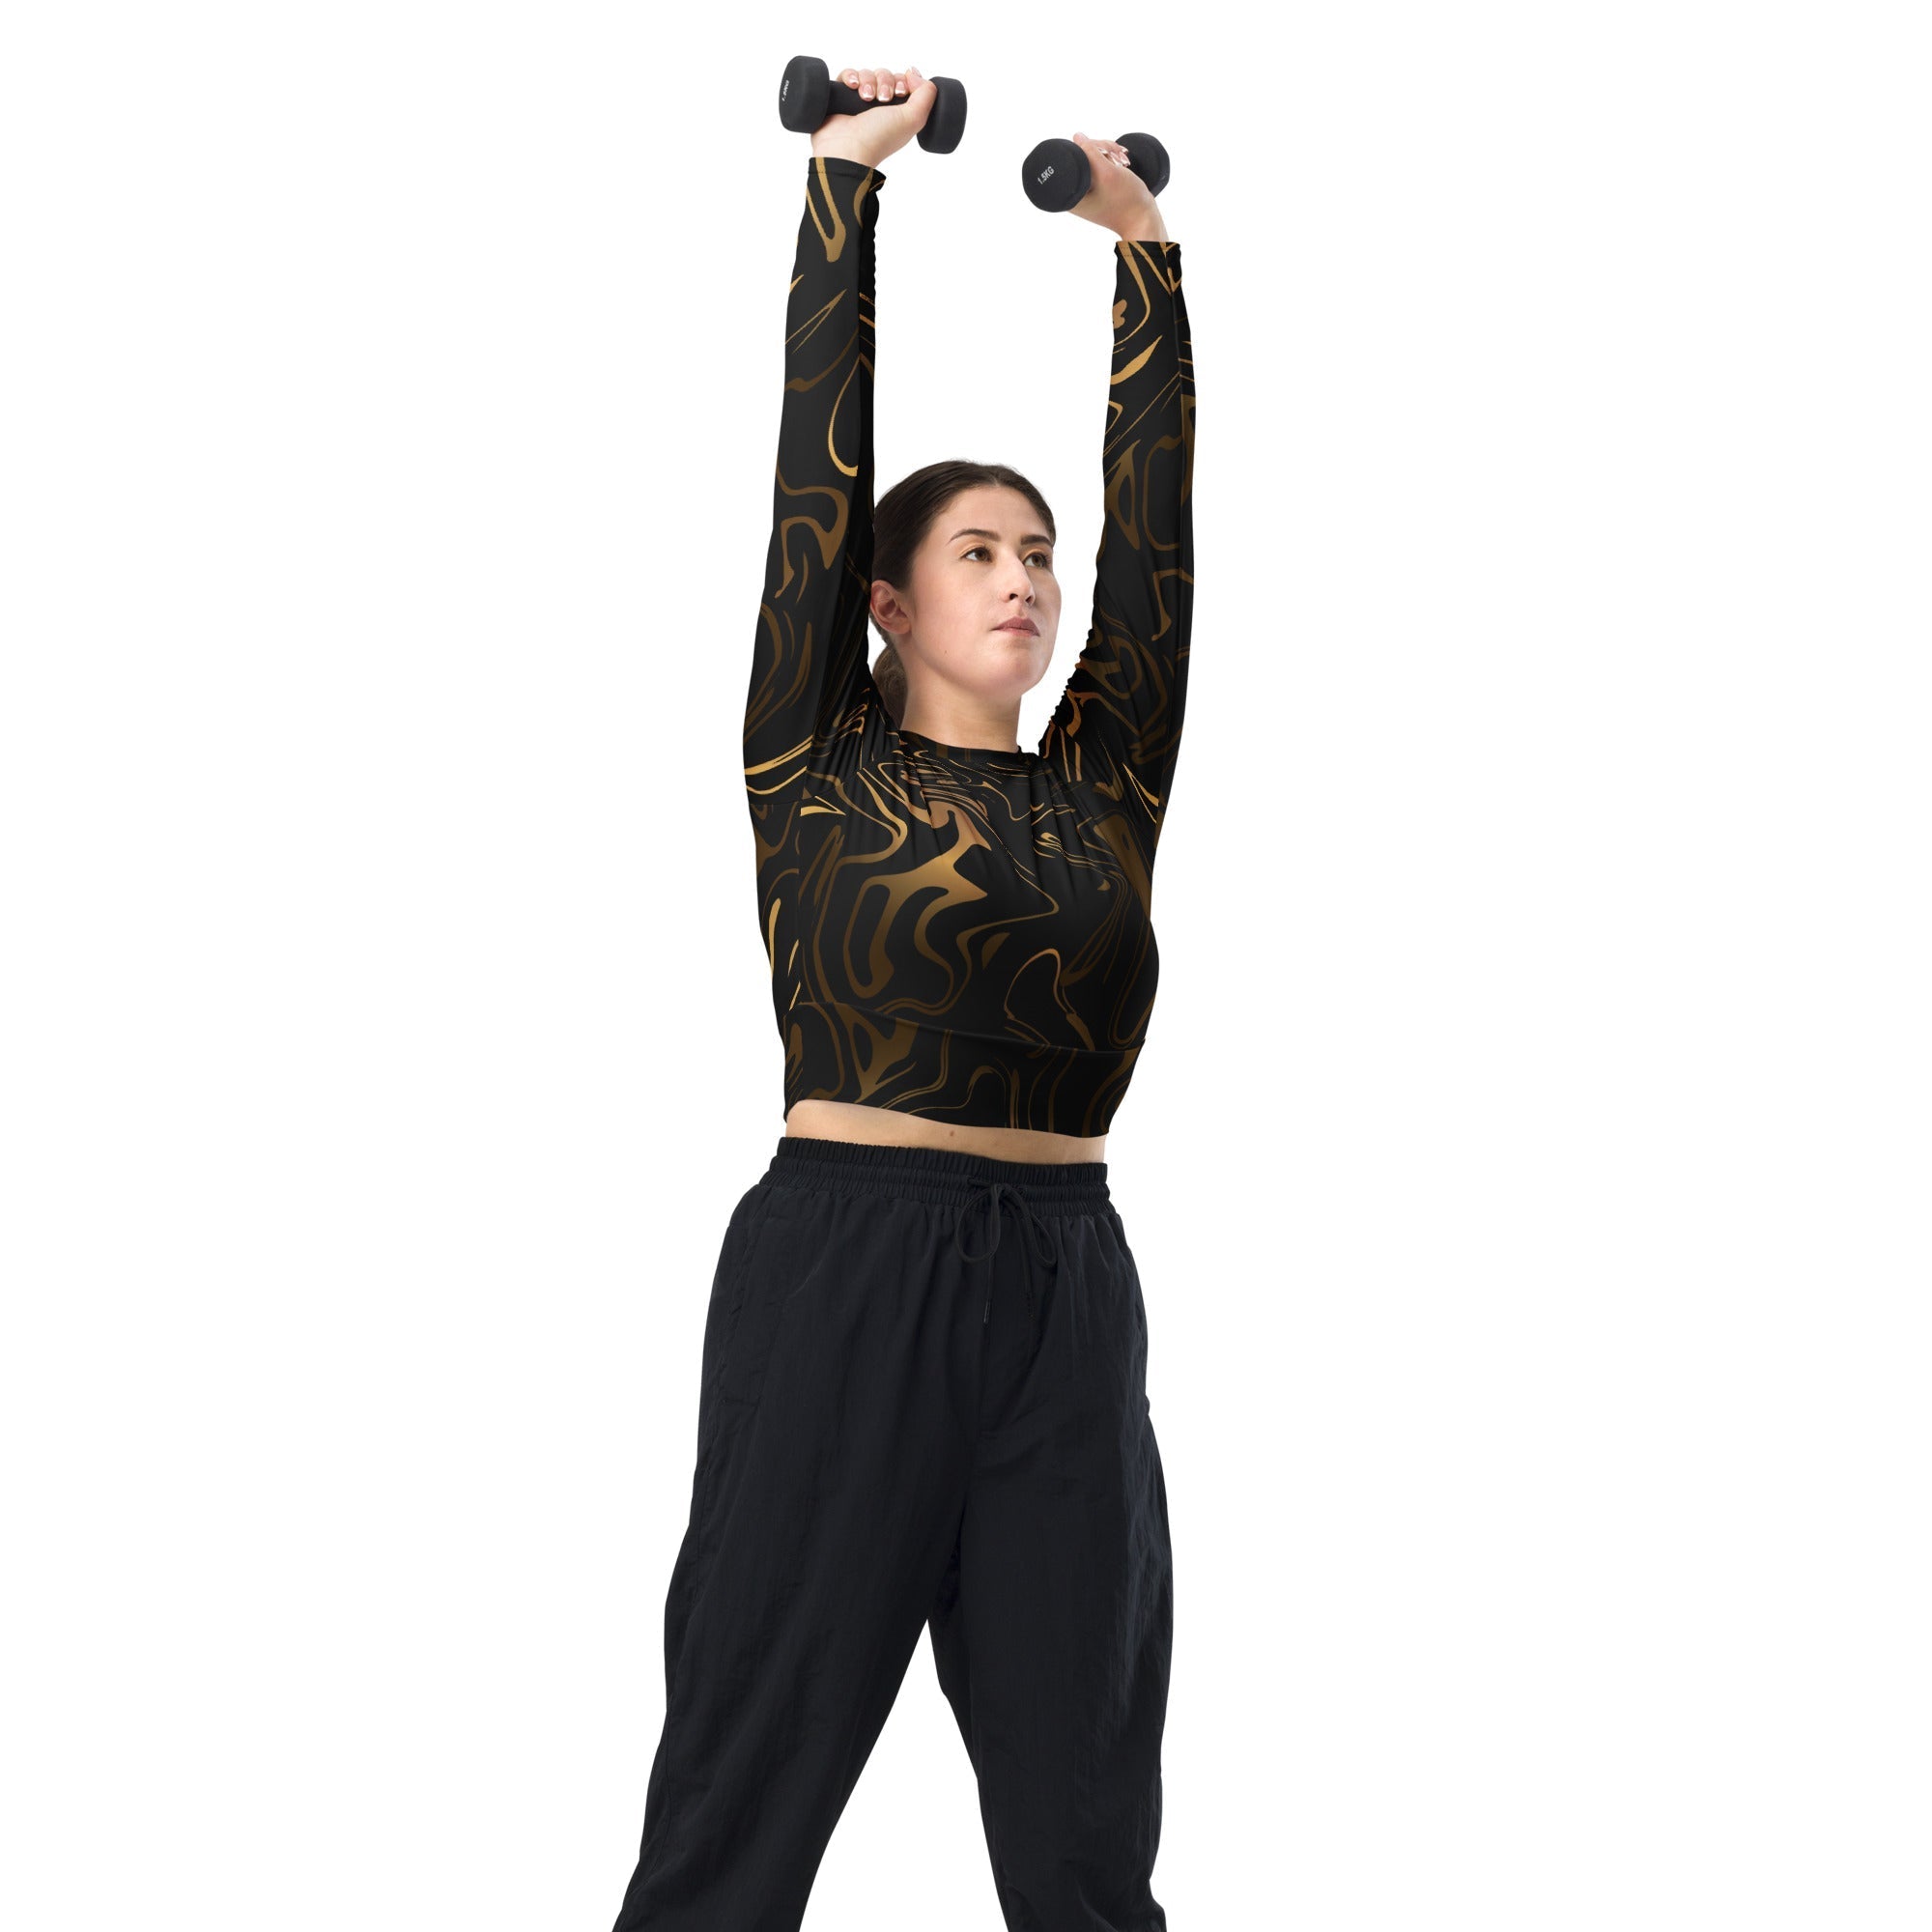 Black & Gold Recycled Long-sleeve Crop Top